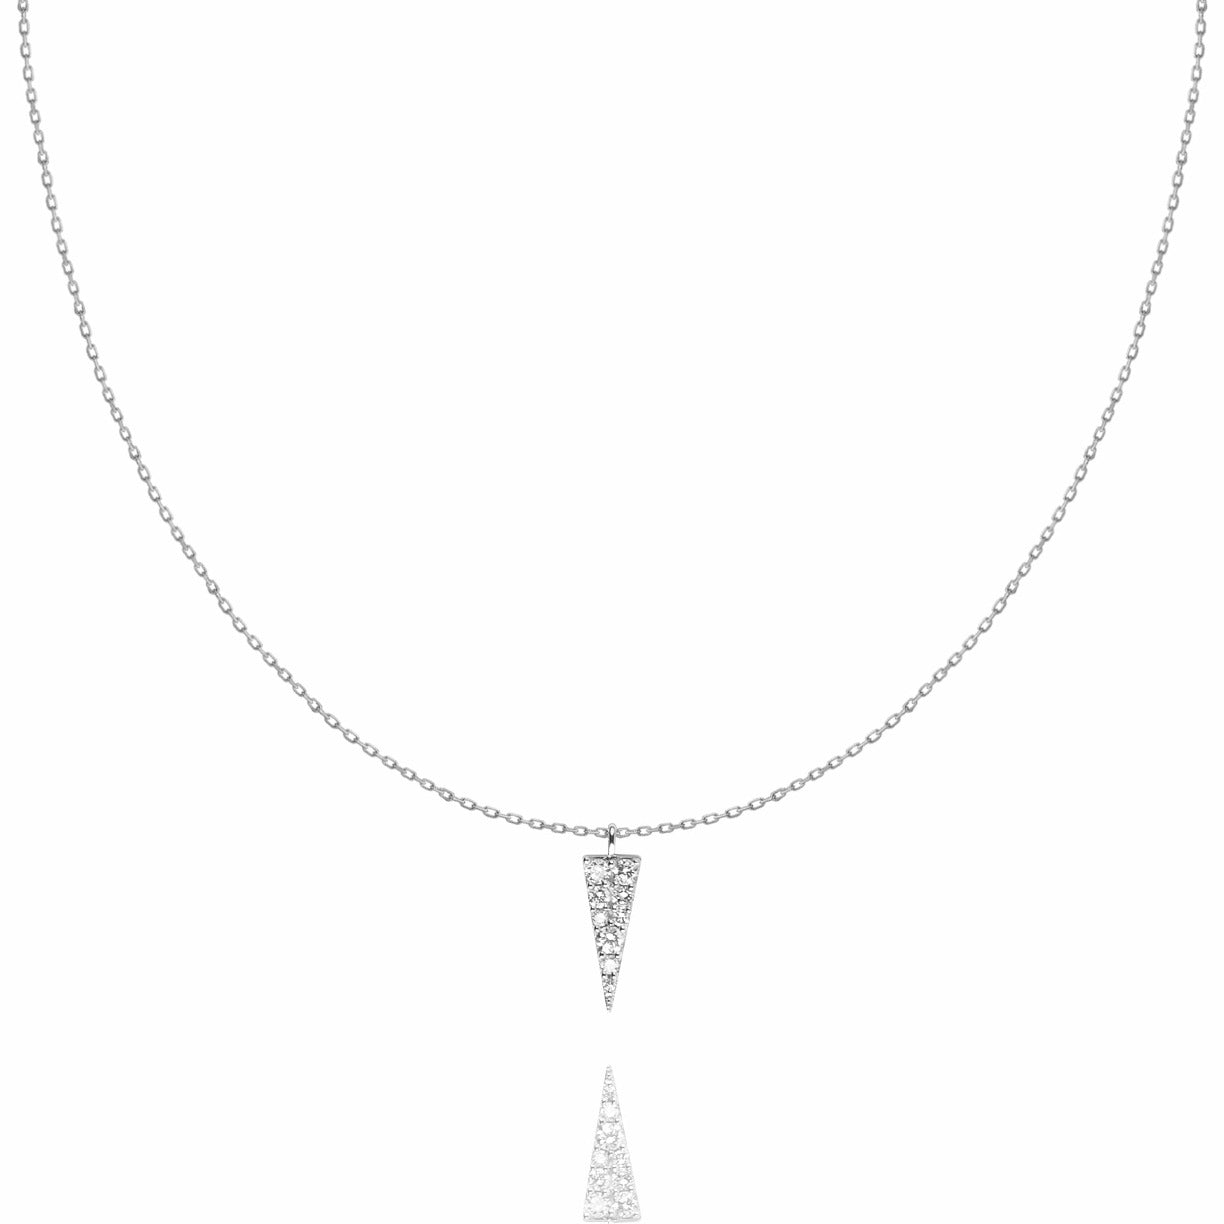 White gold spike necklace